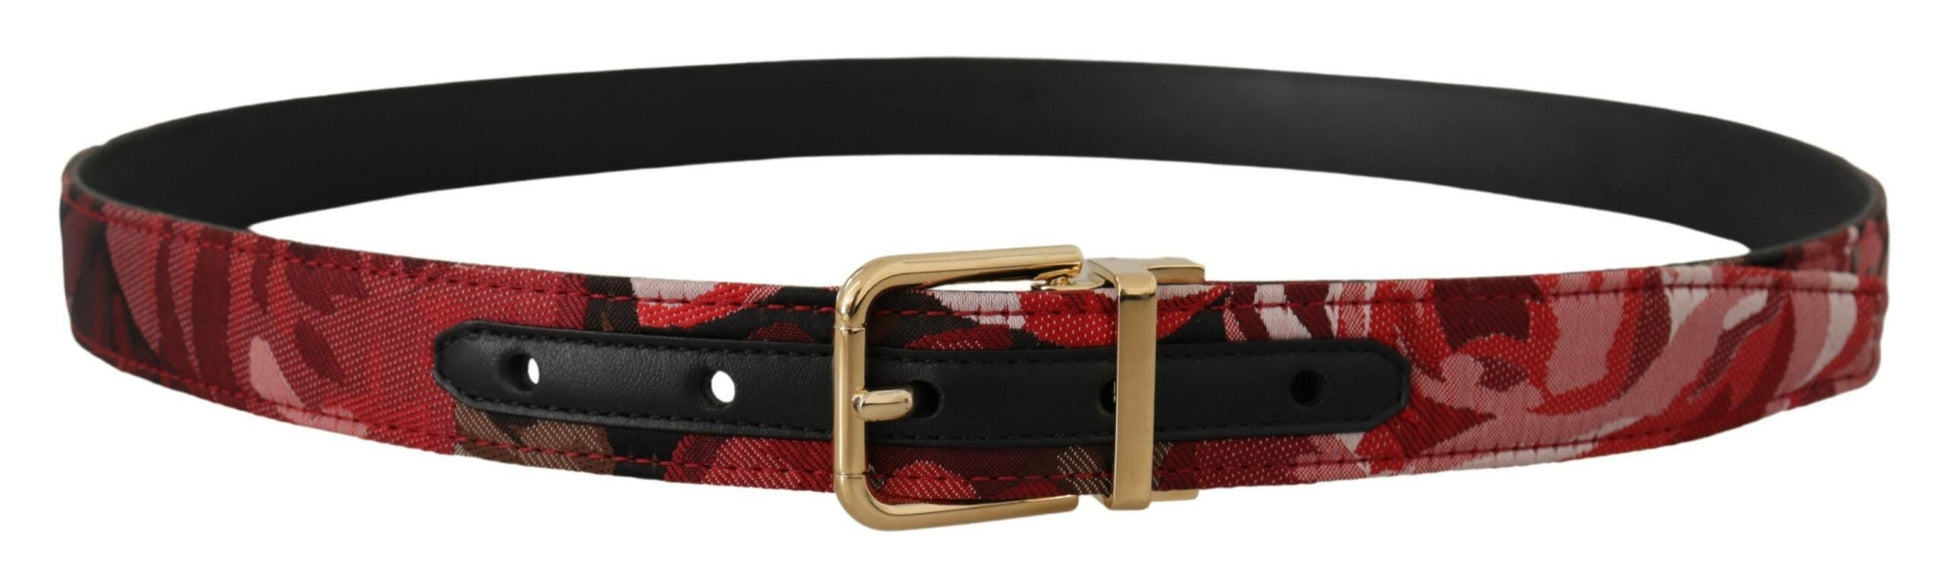 Dolce & Gabbana Red Multicolor Leather Belt with Gold-Tone Buckle | Fashionsarah.com